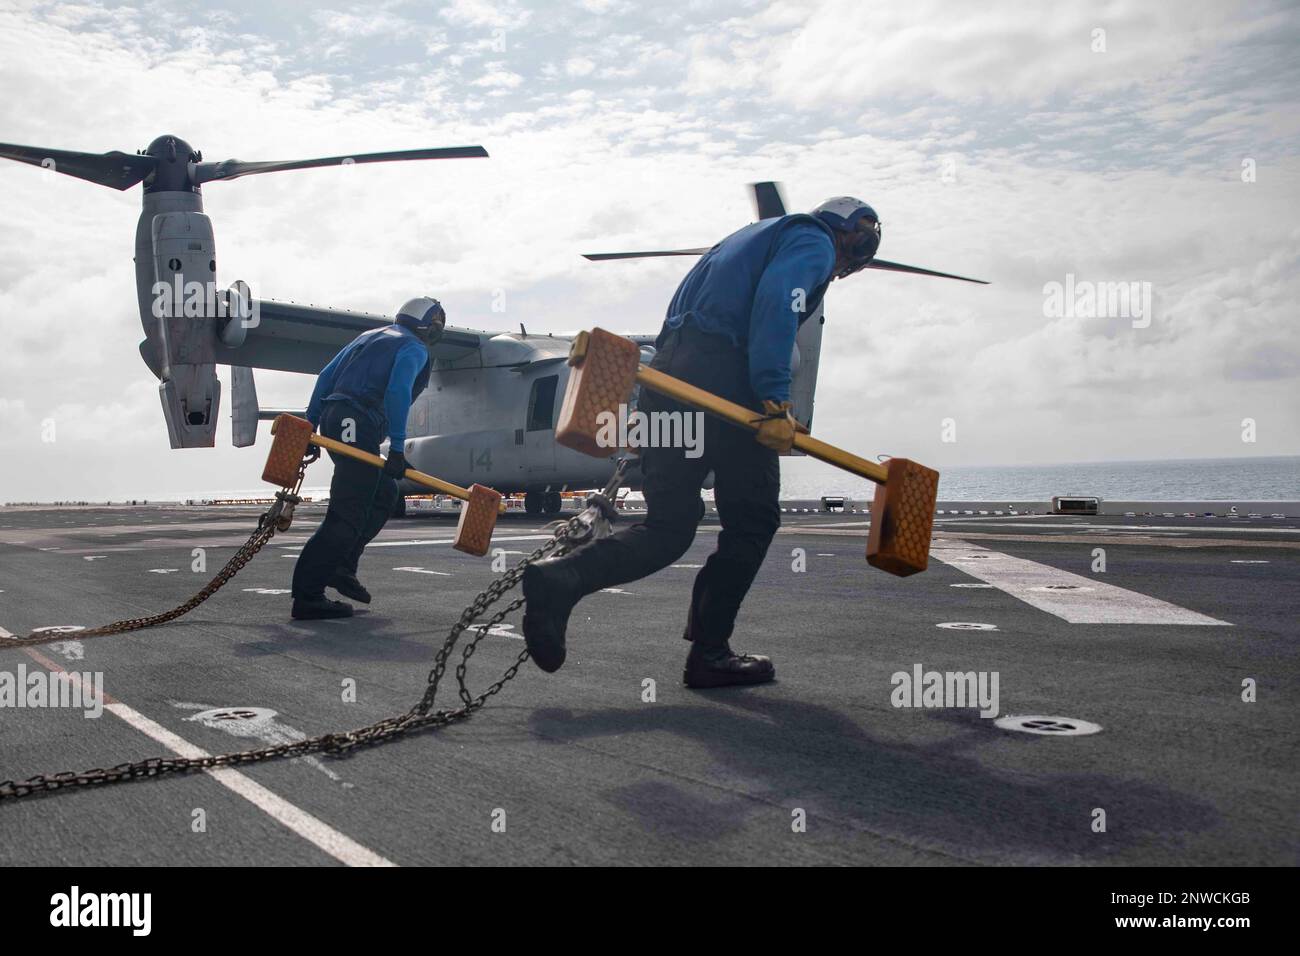 230102-N-VS068-2075    SOUTH CHINA SEA (Jan. 2, 2023) – Aviation Boatswain’s Mate Airman Gabriel Harris, right, and Airman Abdirahman Mohammed carry chocks and chains to an MV-22 Osprey, assigned to Marine Medium Tiltrotor Squadron (VMM) 362 (Rein.), 13th Marine Expeditionary Unit, on the flight deck of amphibious assault ship USS Makin Island (LHD 8), Jan. 2, 2023. Makin Island is designed to field an integrated amphibious force that can support operational commanders around the globe with both strike and amphibious capabilities. The Makin Island Amphibious Ready Group, comprised of amphibiou Stock Photo